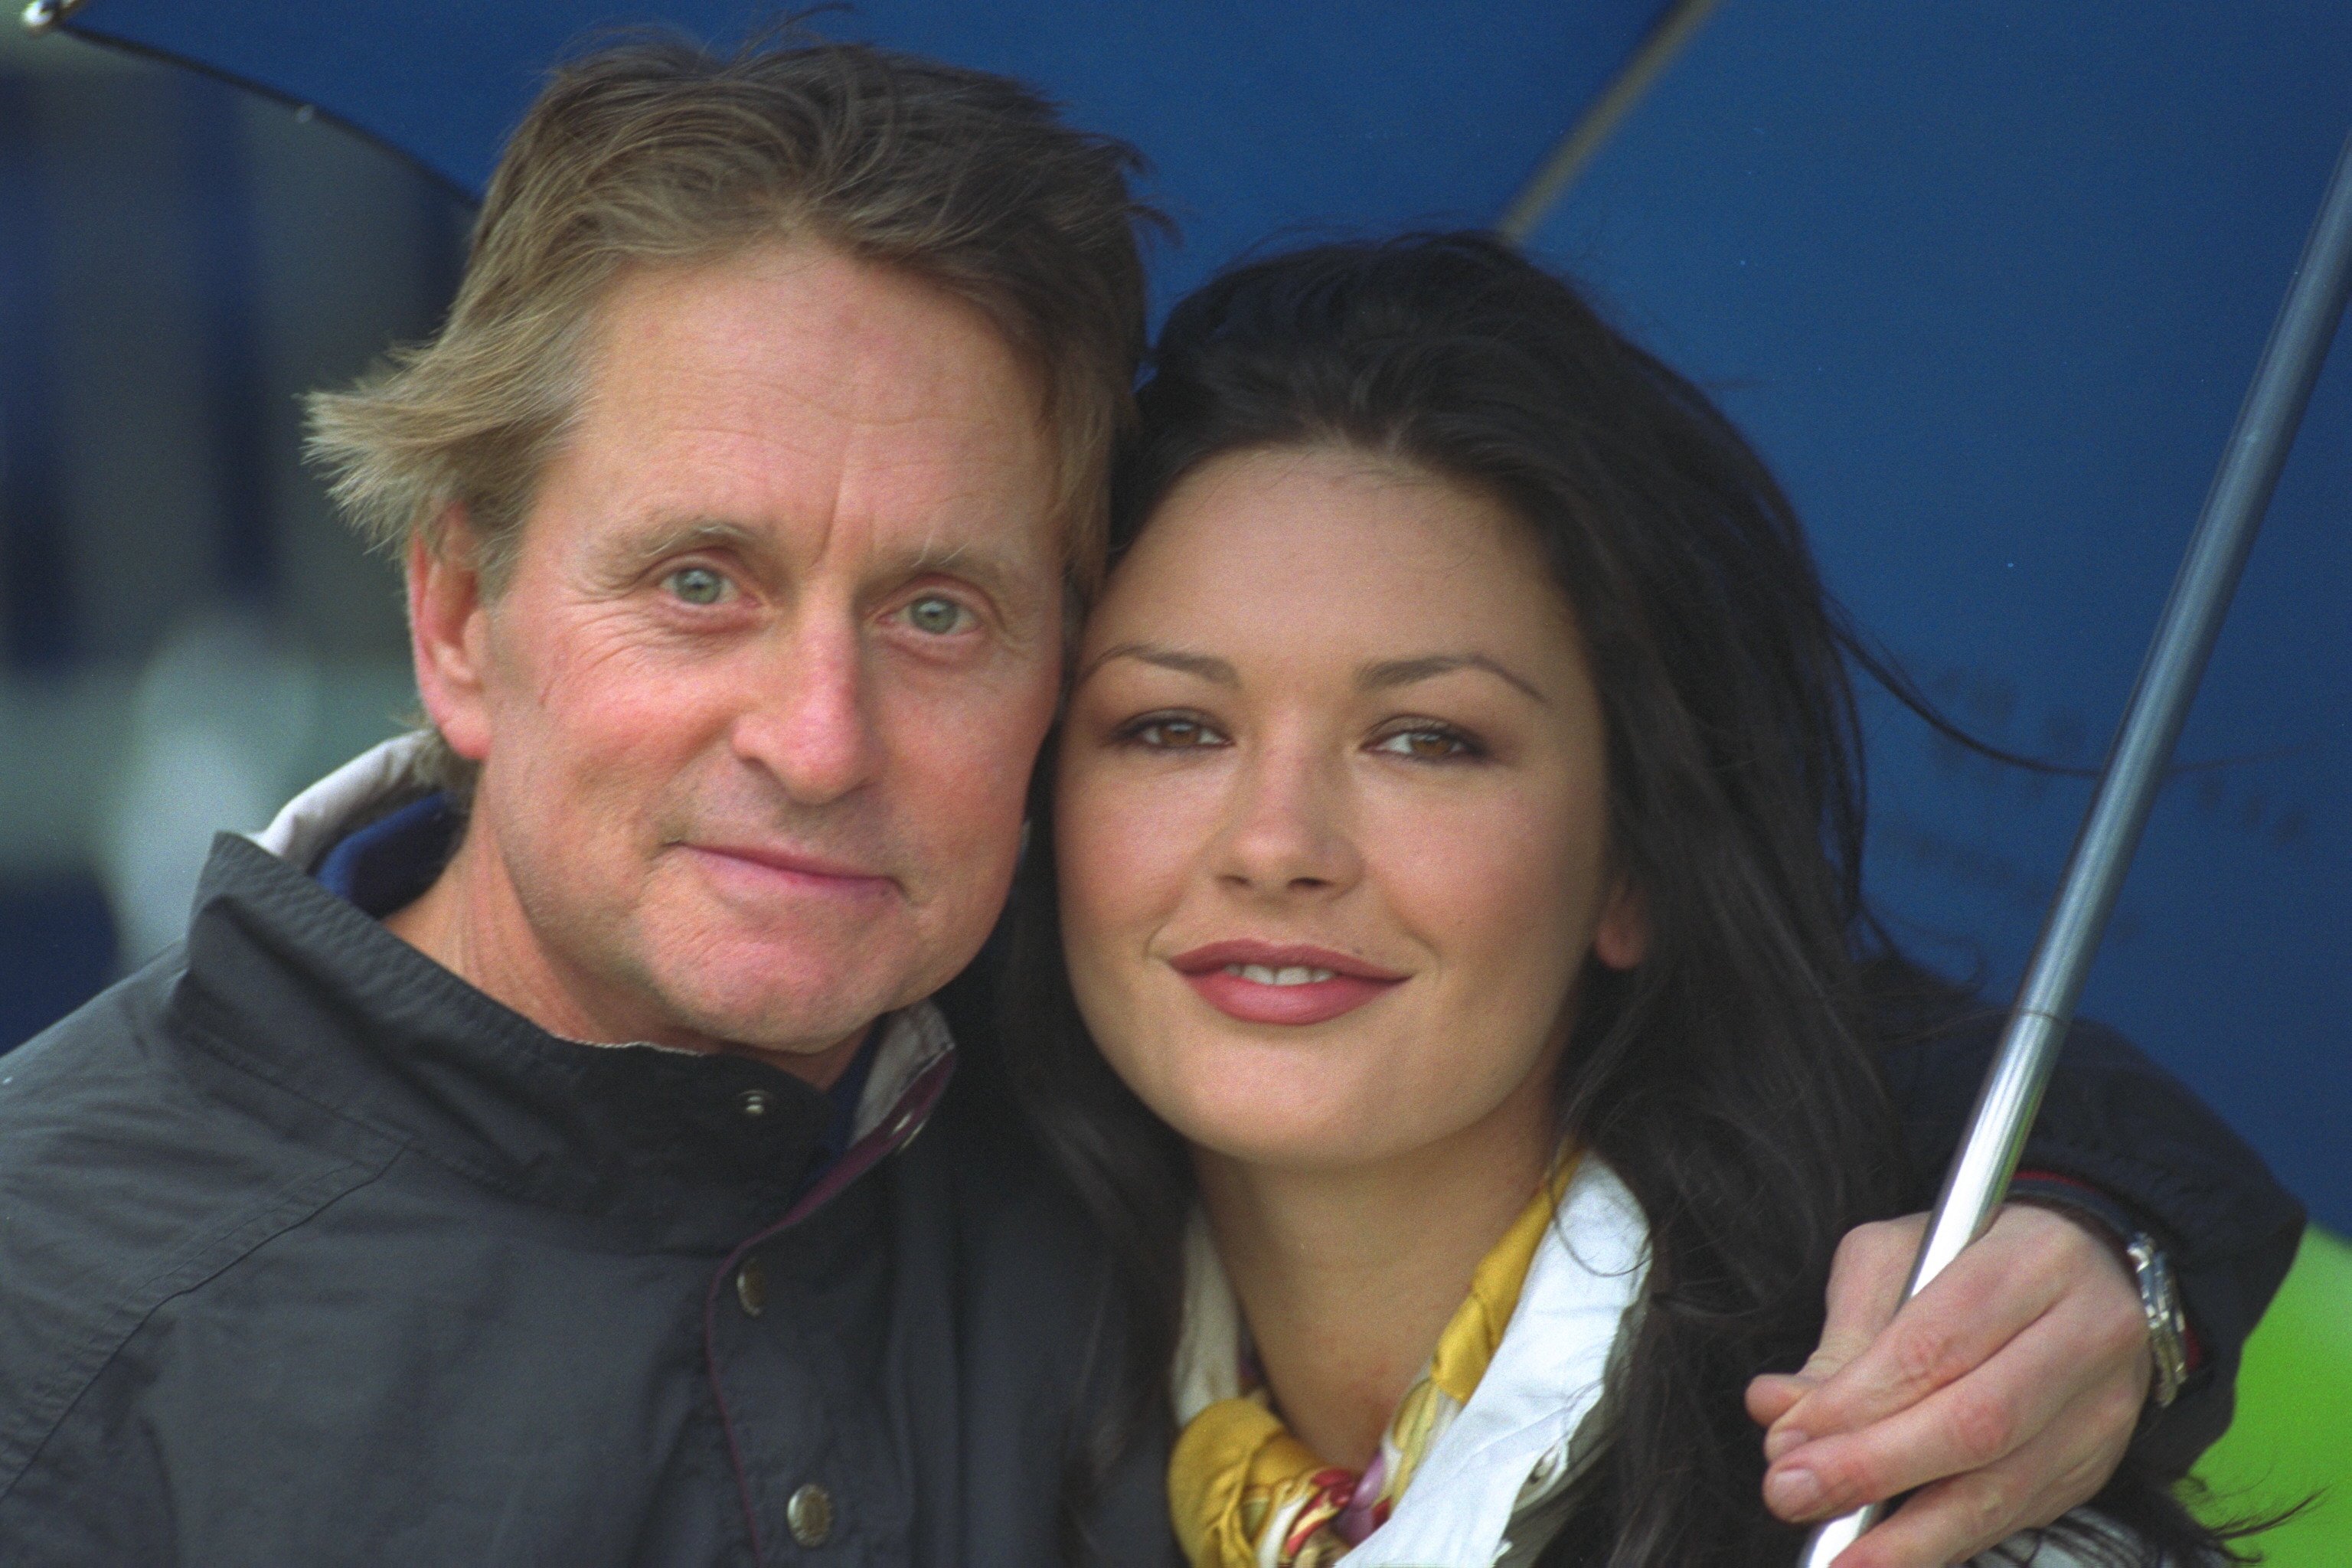 Michael Douglas and Catherine Zeta-Jones shelter from the drizzle while playing golf at St. Andrews on October 11, 2000 ┃Source: Getty Images